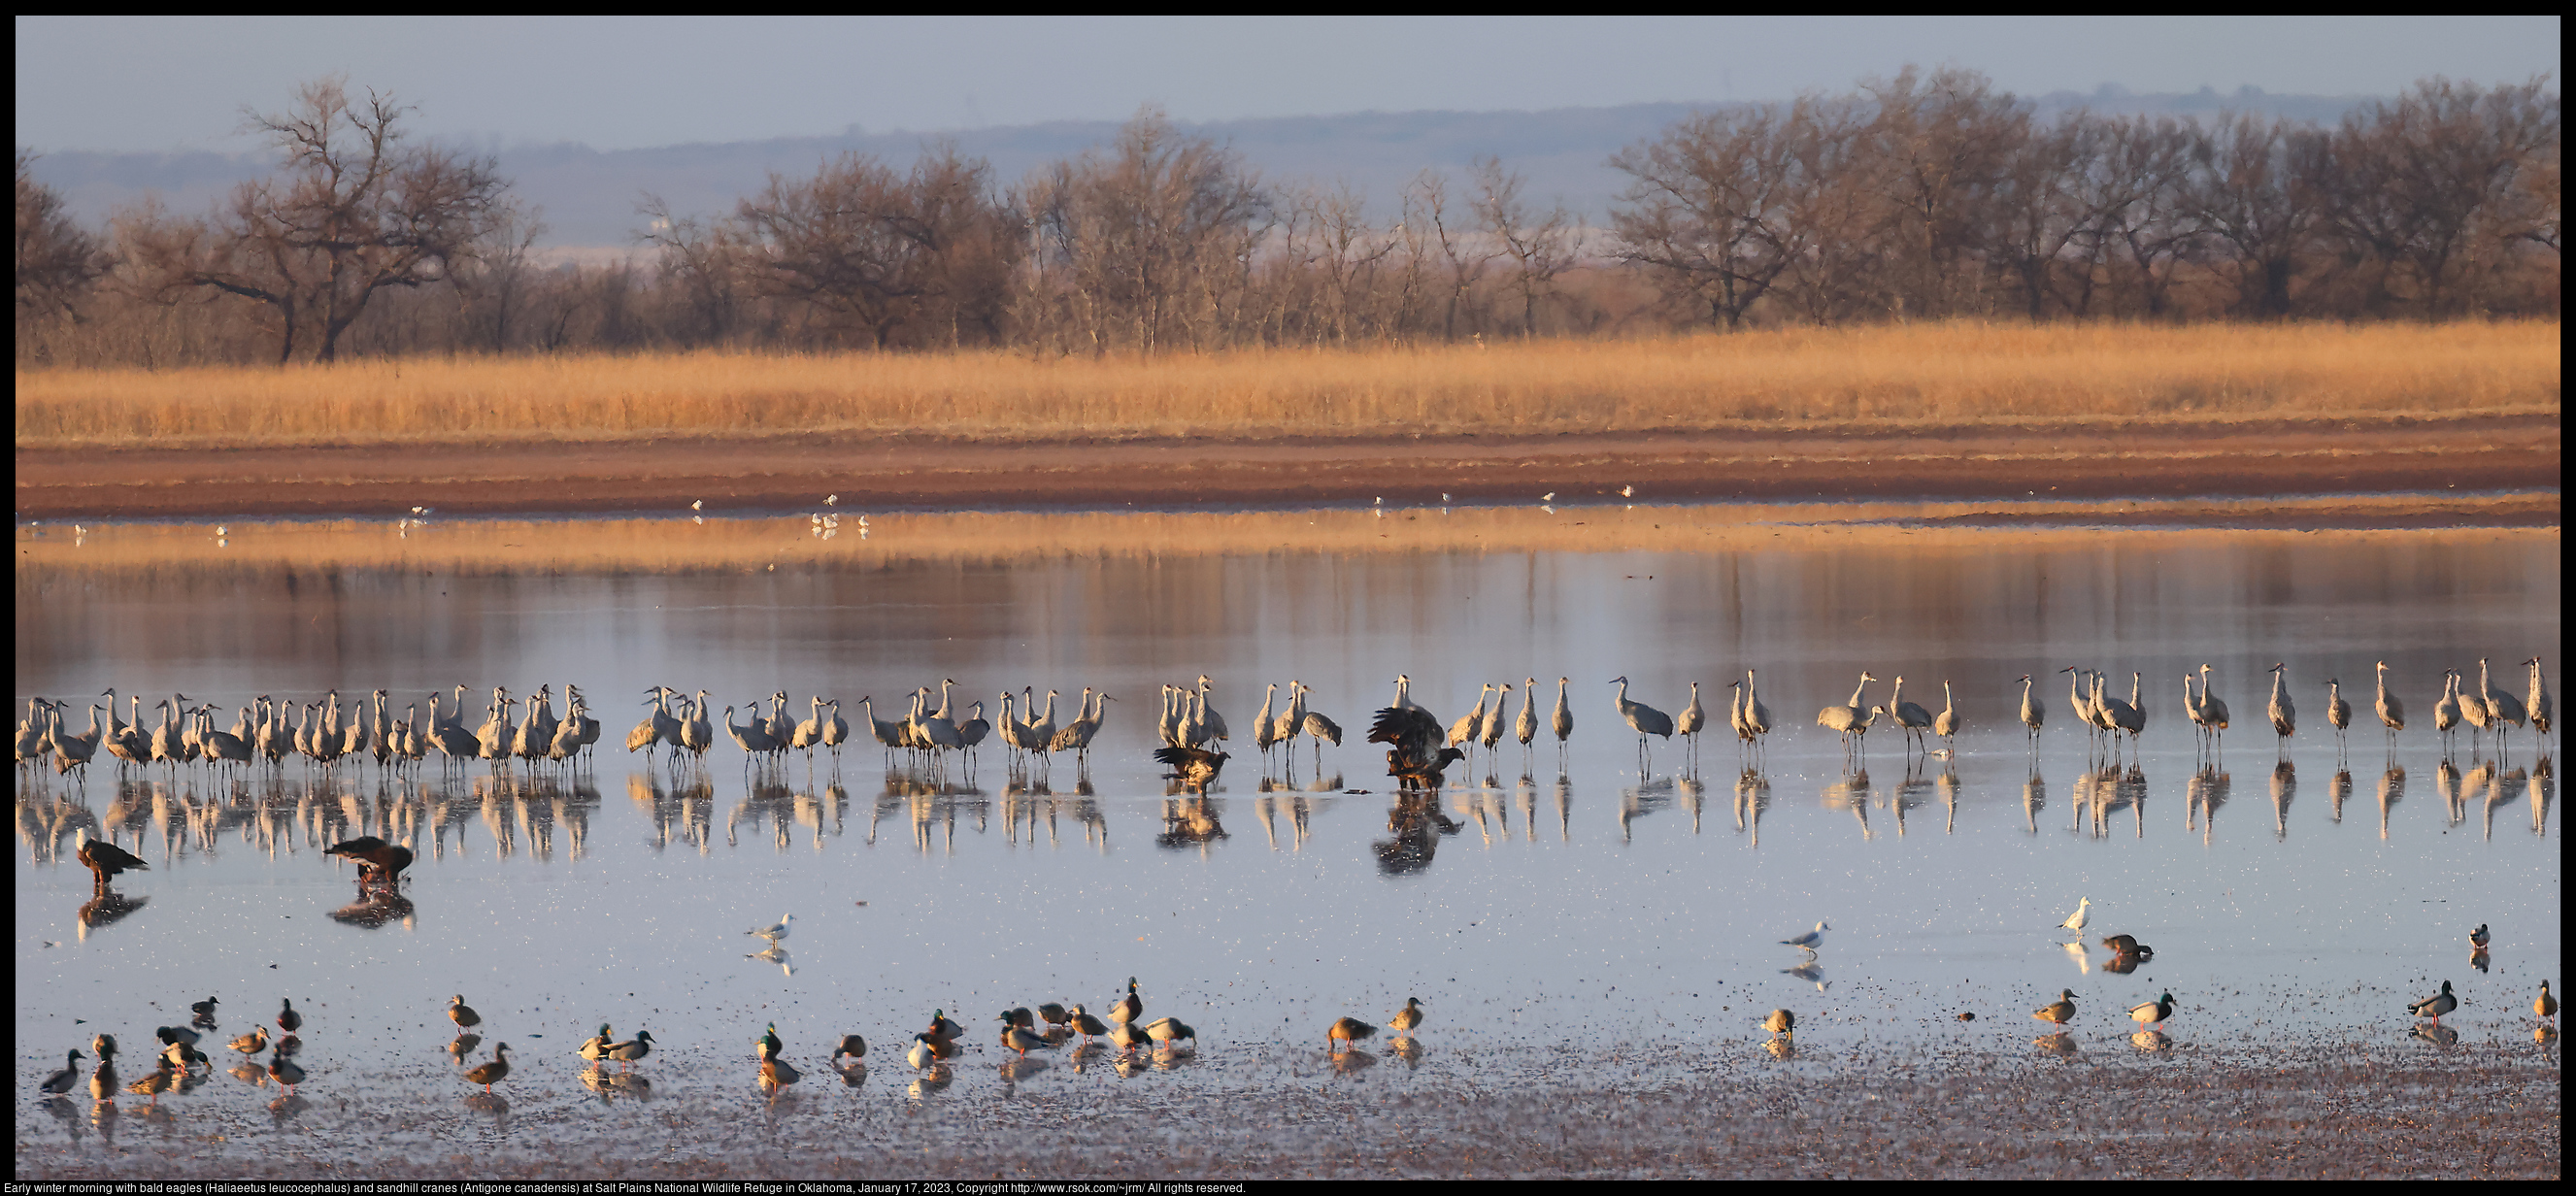 Early winter morning with bald eagles (Haliaeetus leucocephalus) and sandhill cranes (Antigone canadensis) at Salt Plains National Wildlife Refuge in Oklahoma, January 17, 2023